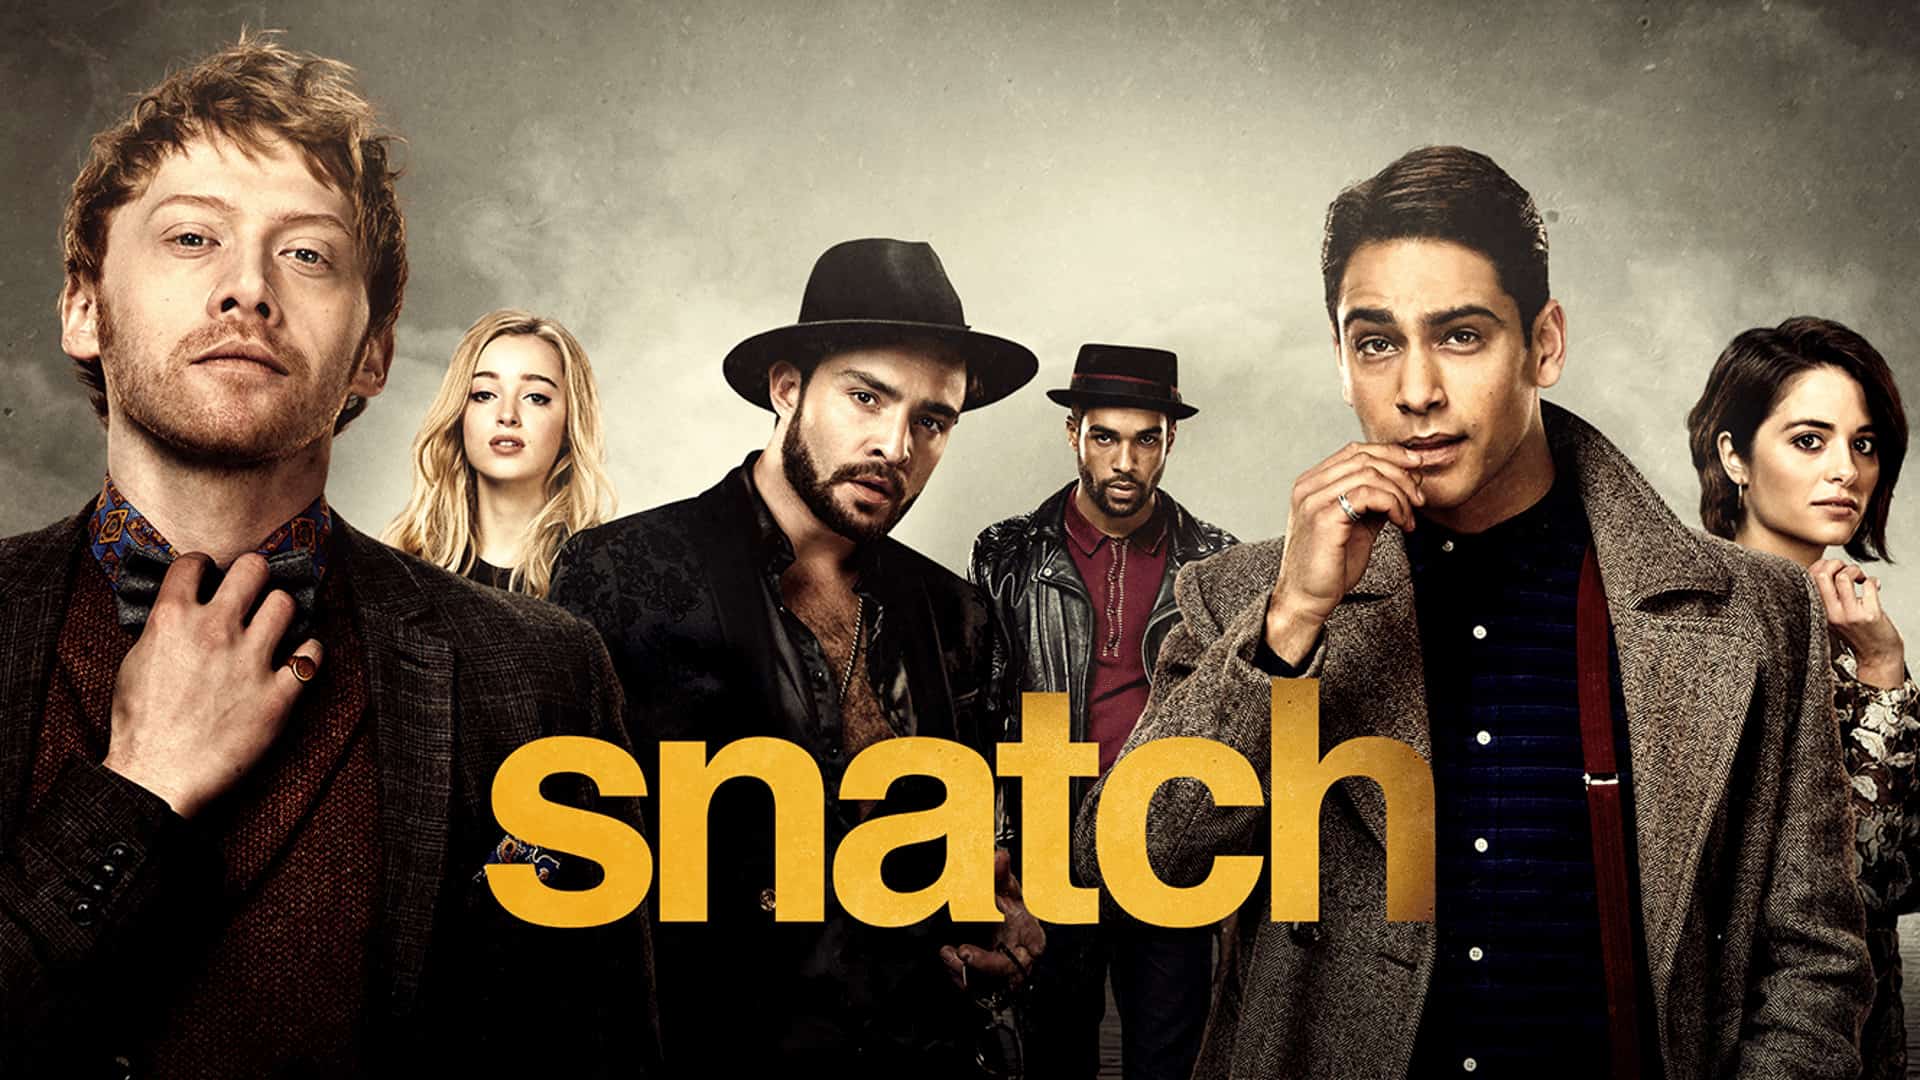 Watch the thrilling TV series “Snatch” exclusively with du TV on “TV First”